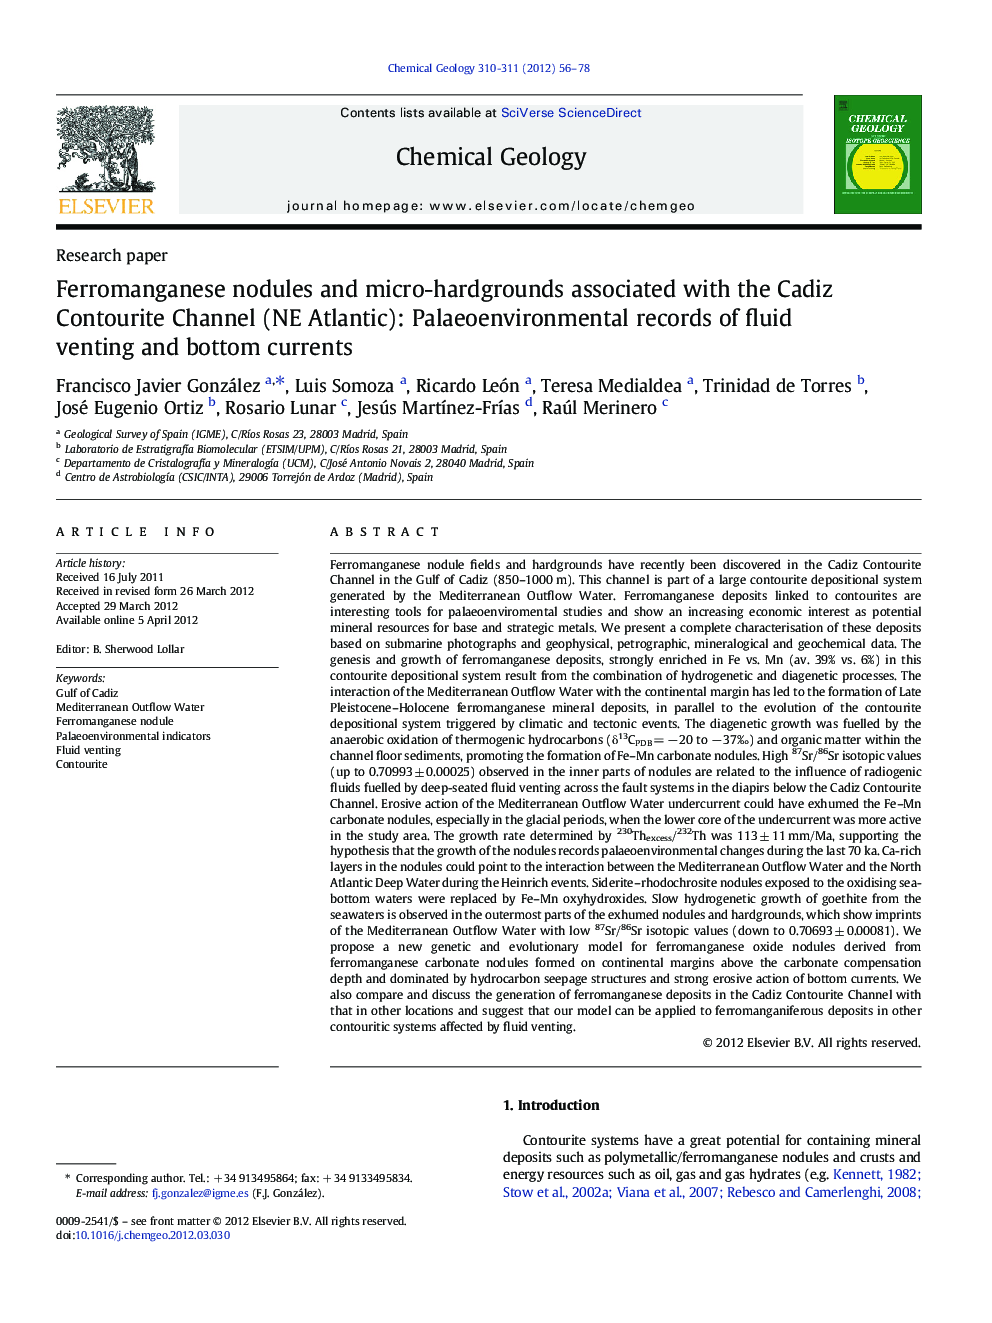 Ferromanganese nodules and micro-hardgrounds associated with the Cadiz Contourite Channel (NE Atlantic): Palaeoenvironmental records of fluid venting and bottom currents